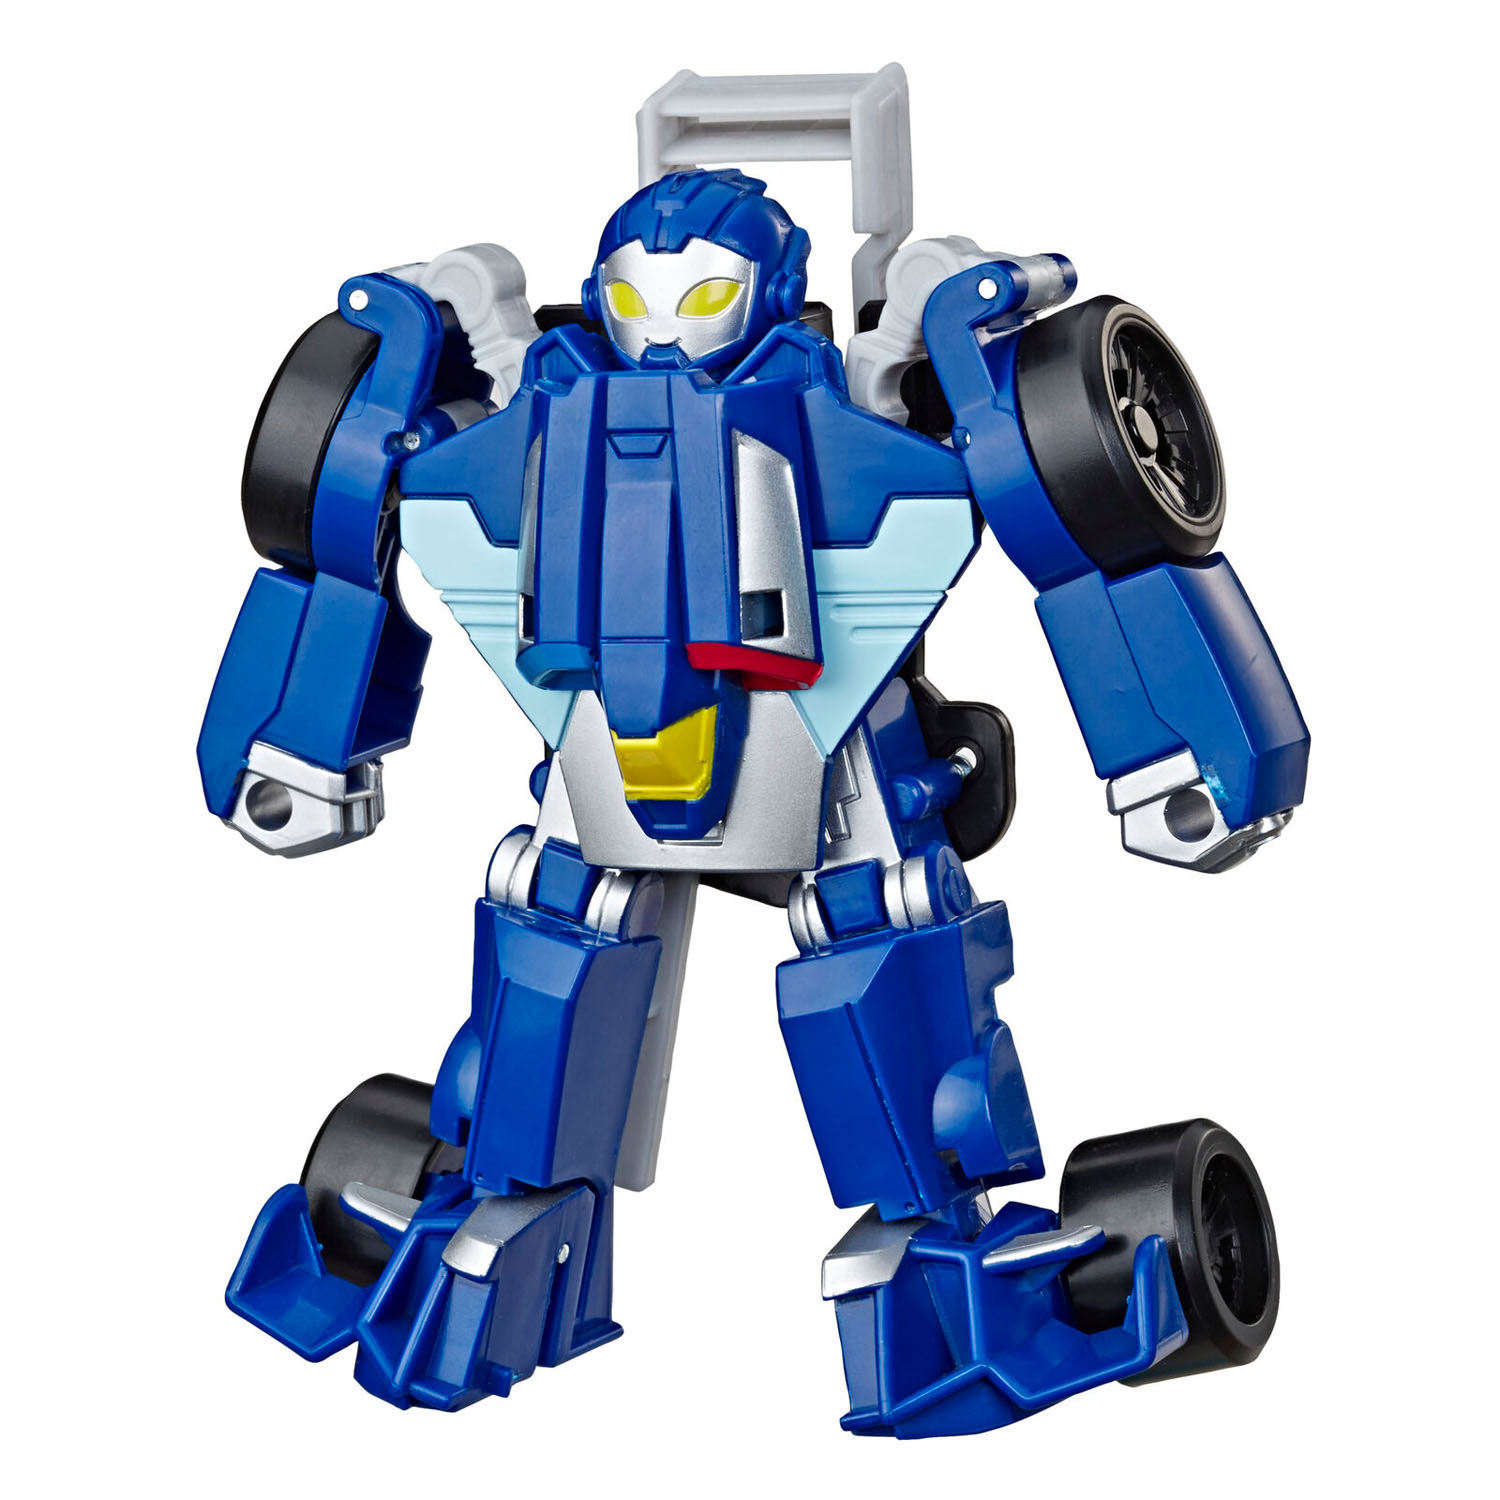 Transformers Rescue Bots Academy - Whirl the Flight online kopen